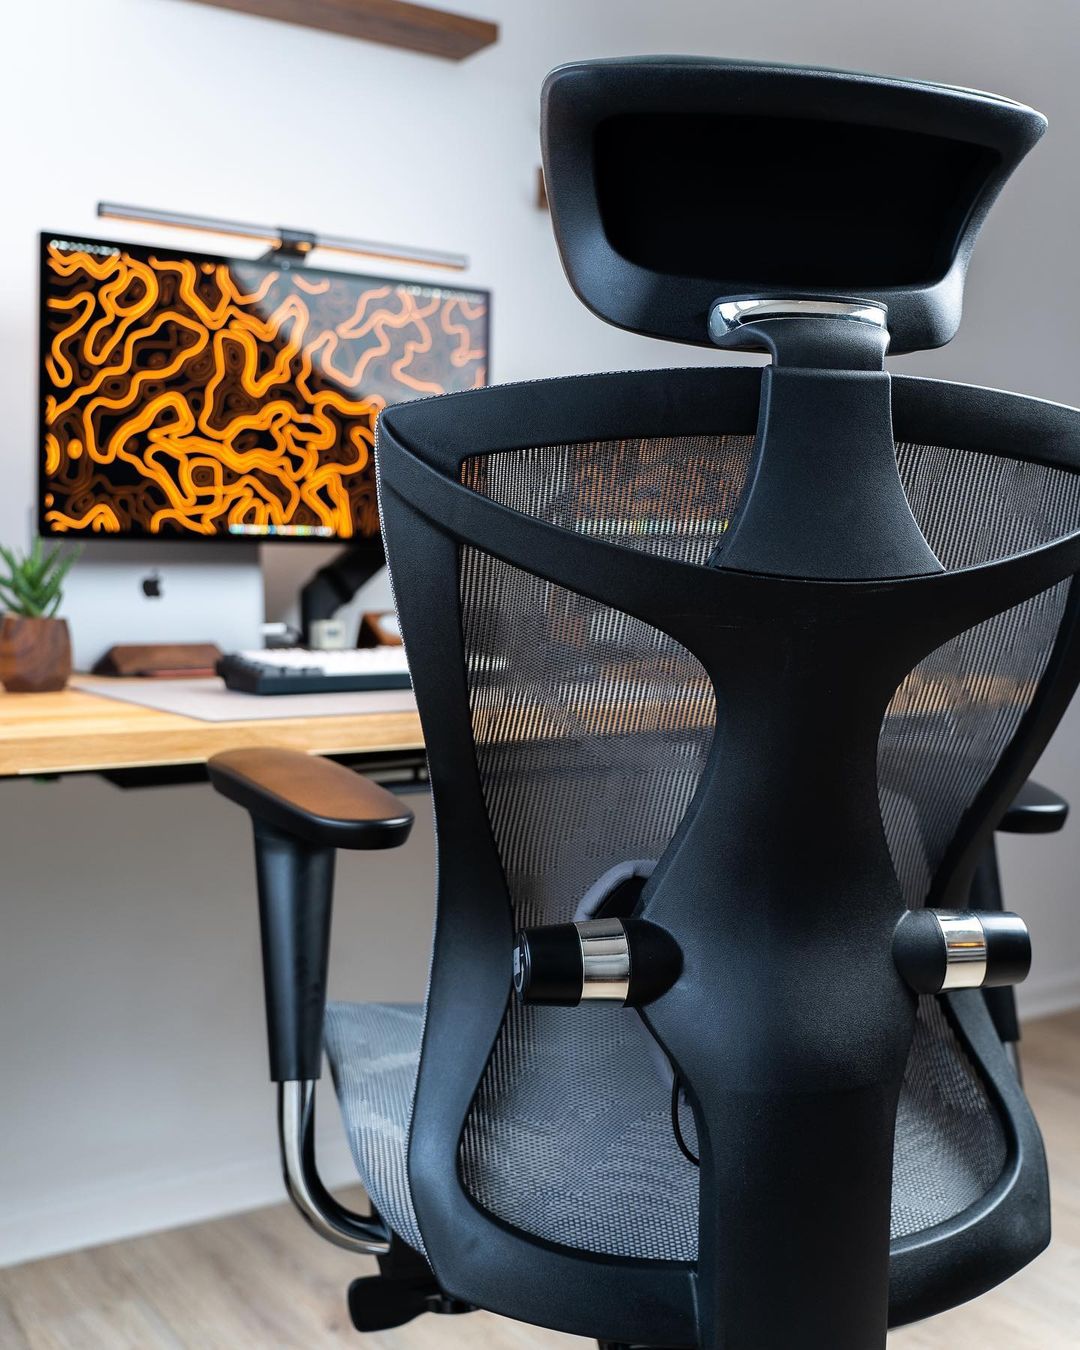 The Benefits of an Ergonomic Chair for Working from Home